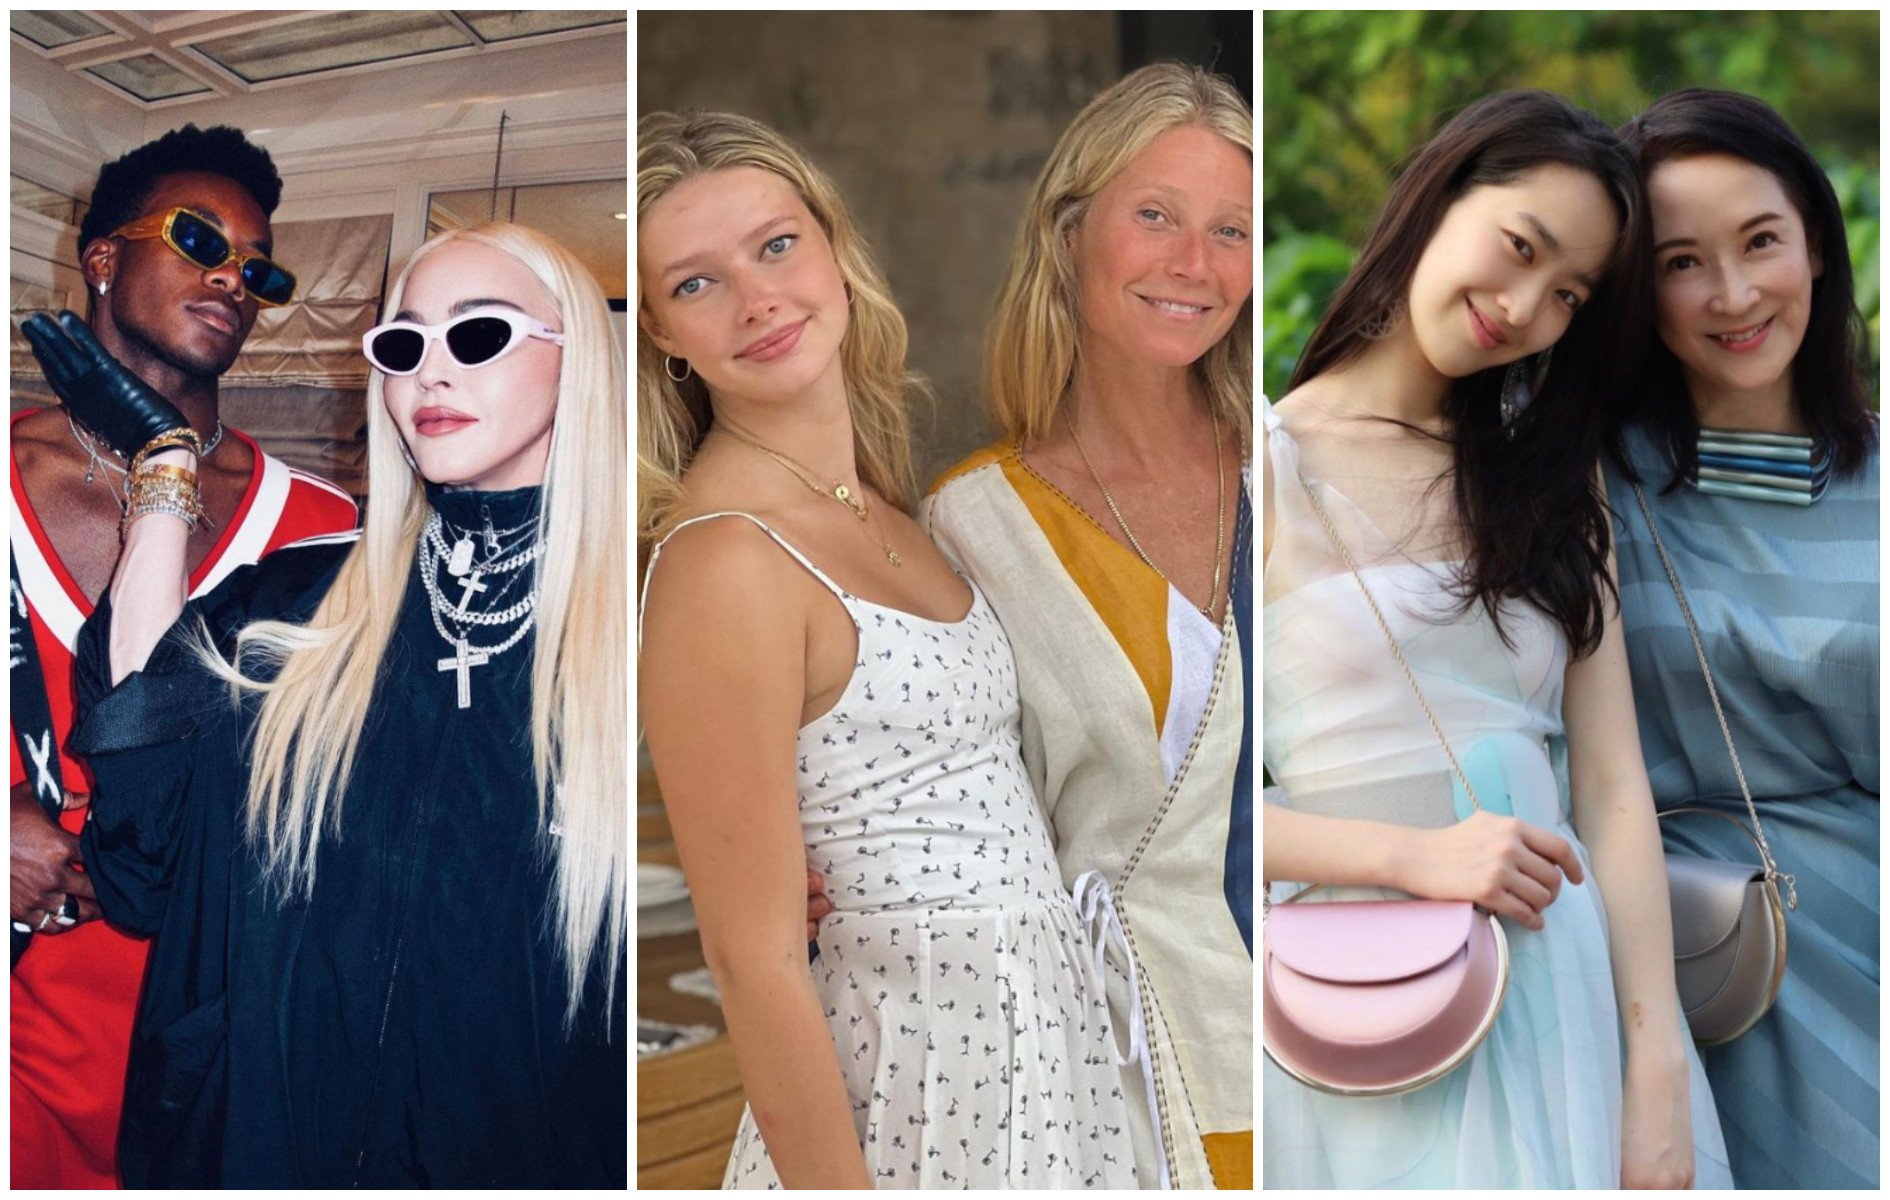 Madonna with her son David Banda, Gwyneth Paltrow with her daughter Apple Martin and Mimi Kung’s daughter Ashley Lin. Photos: @madonna, @gwynethpaltrow, @kaening/Instagram